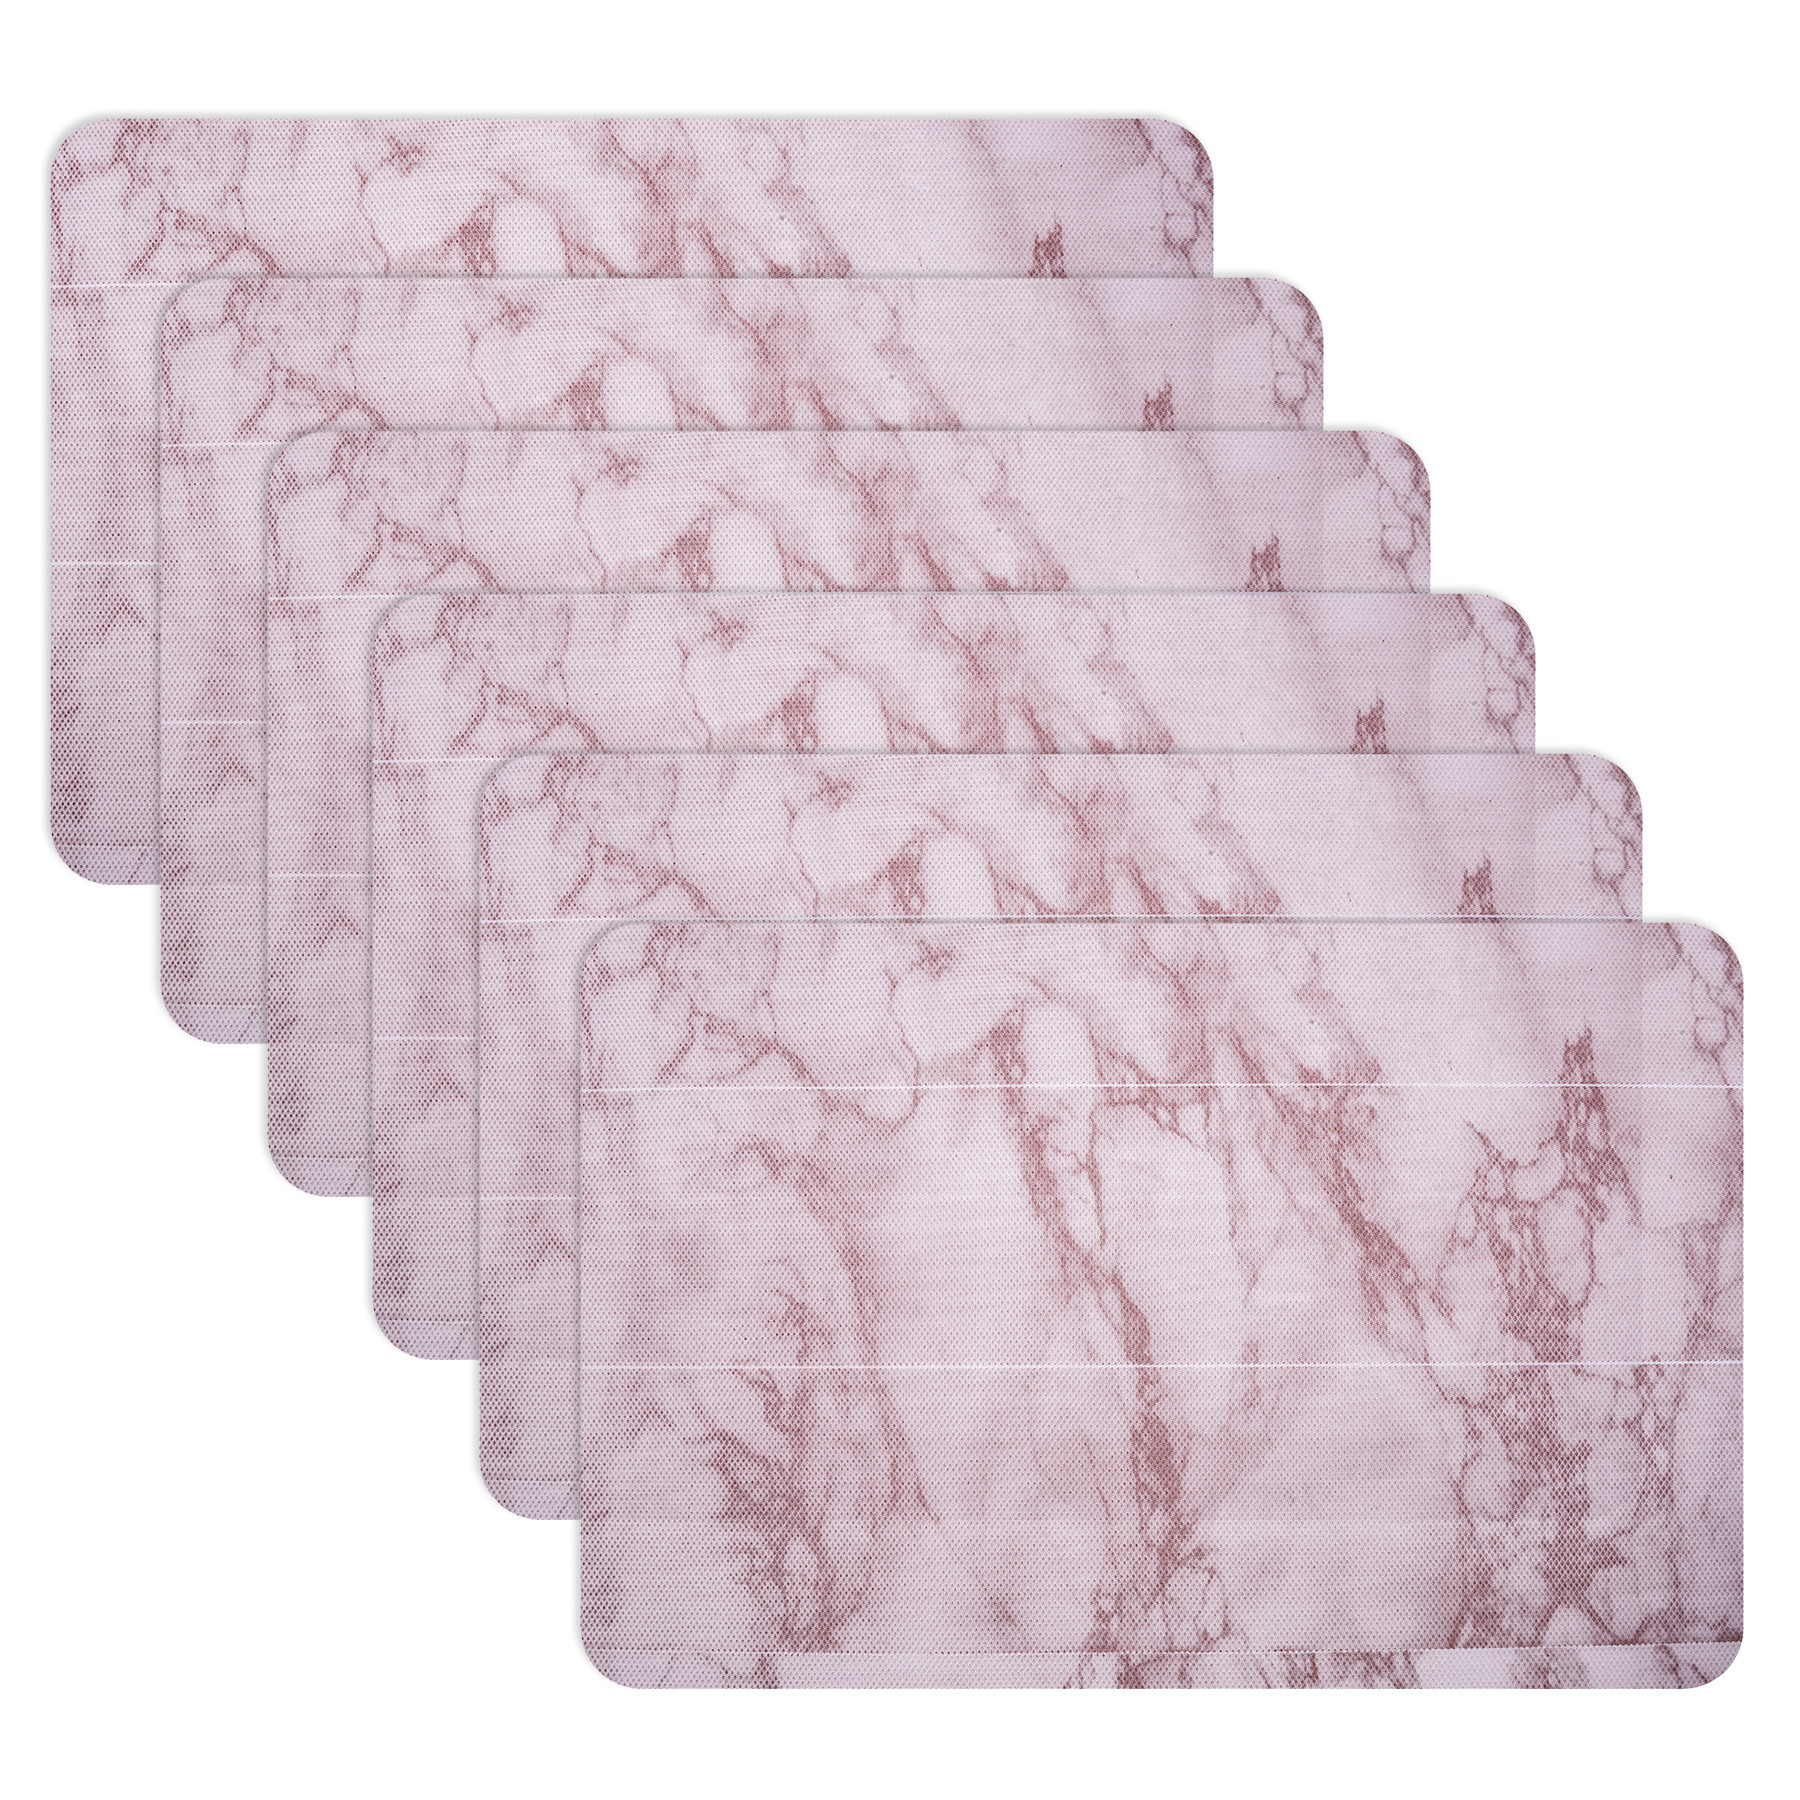 Kuber Industries Placemat | Placemats for Dining Room | Anti-Slip Table Mat Set | Placemats for Kitchen Table | Dining Table Placemats | Marble Placemat | 6 Piece Set | Pink